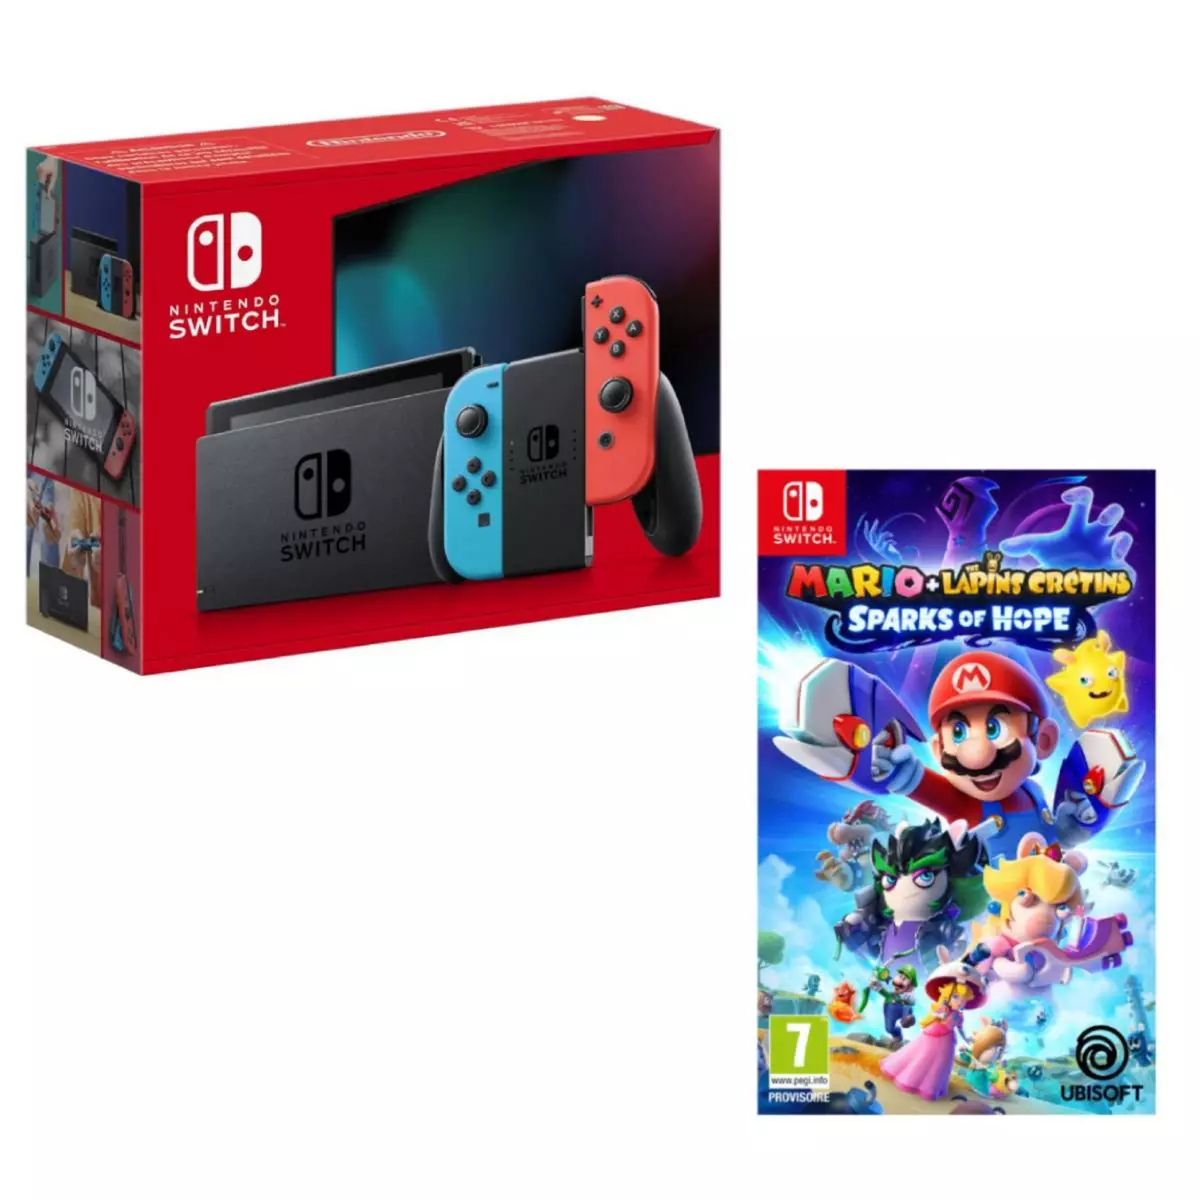 NINTENDO Console Nintendo Switch 1.2 Neon Rouge et Bleu + Mario + The Lapins Crétins Sparks of Hope Nintendo Switch